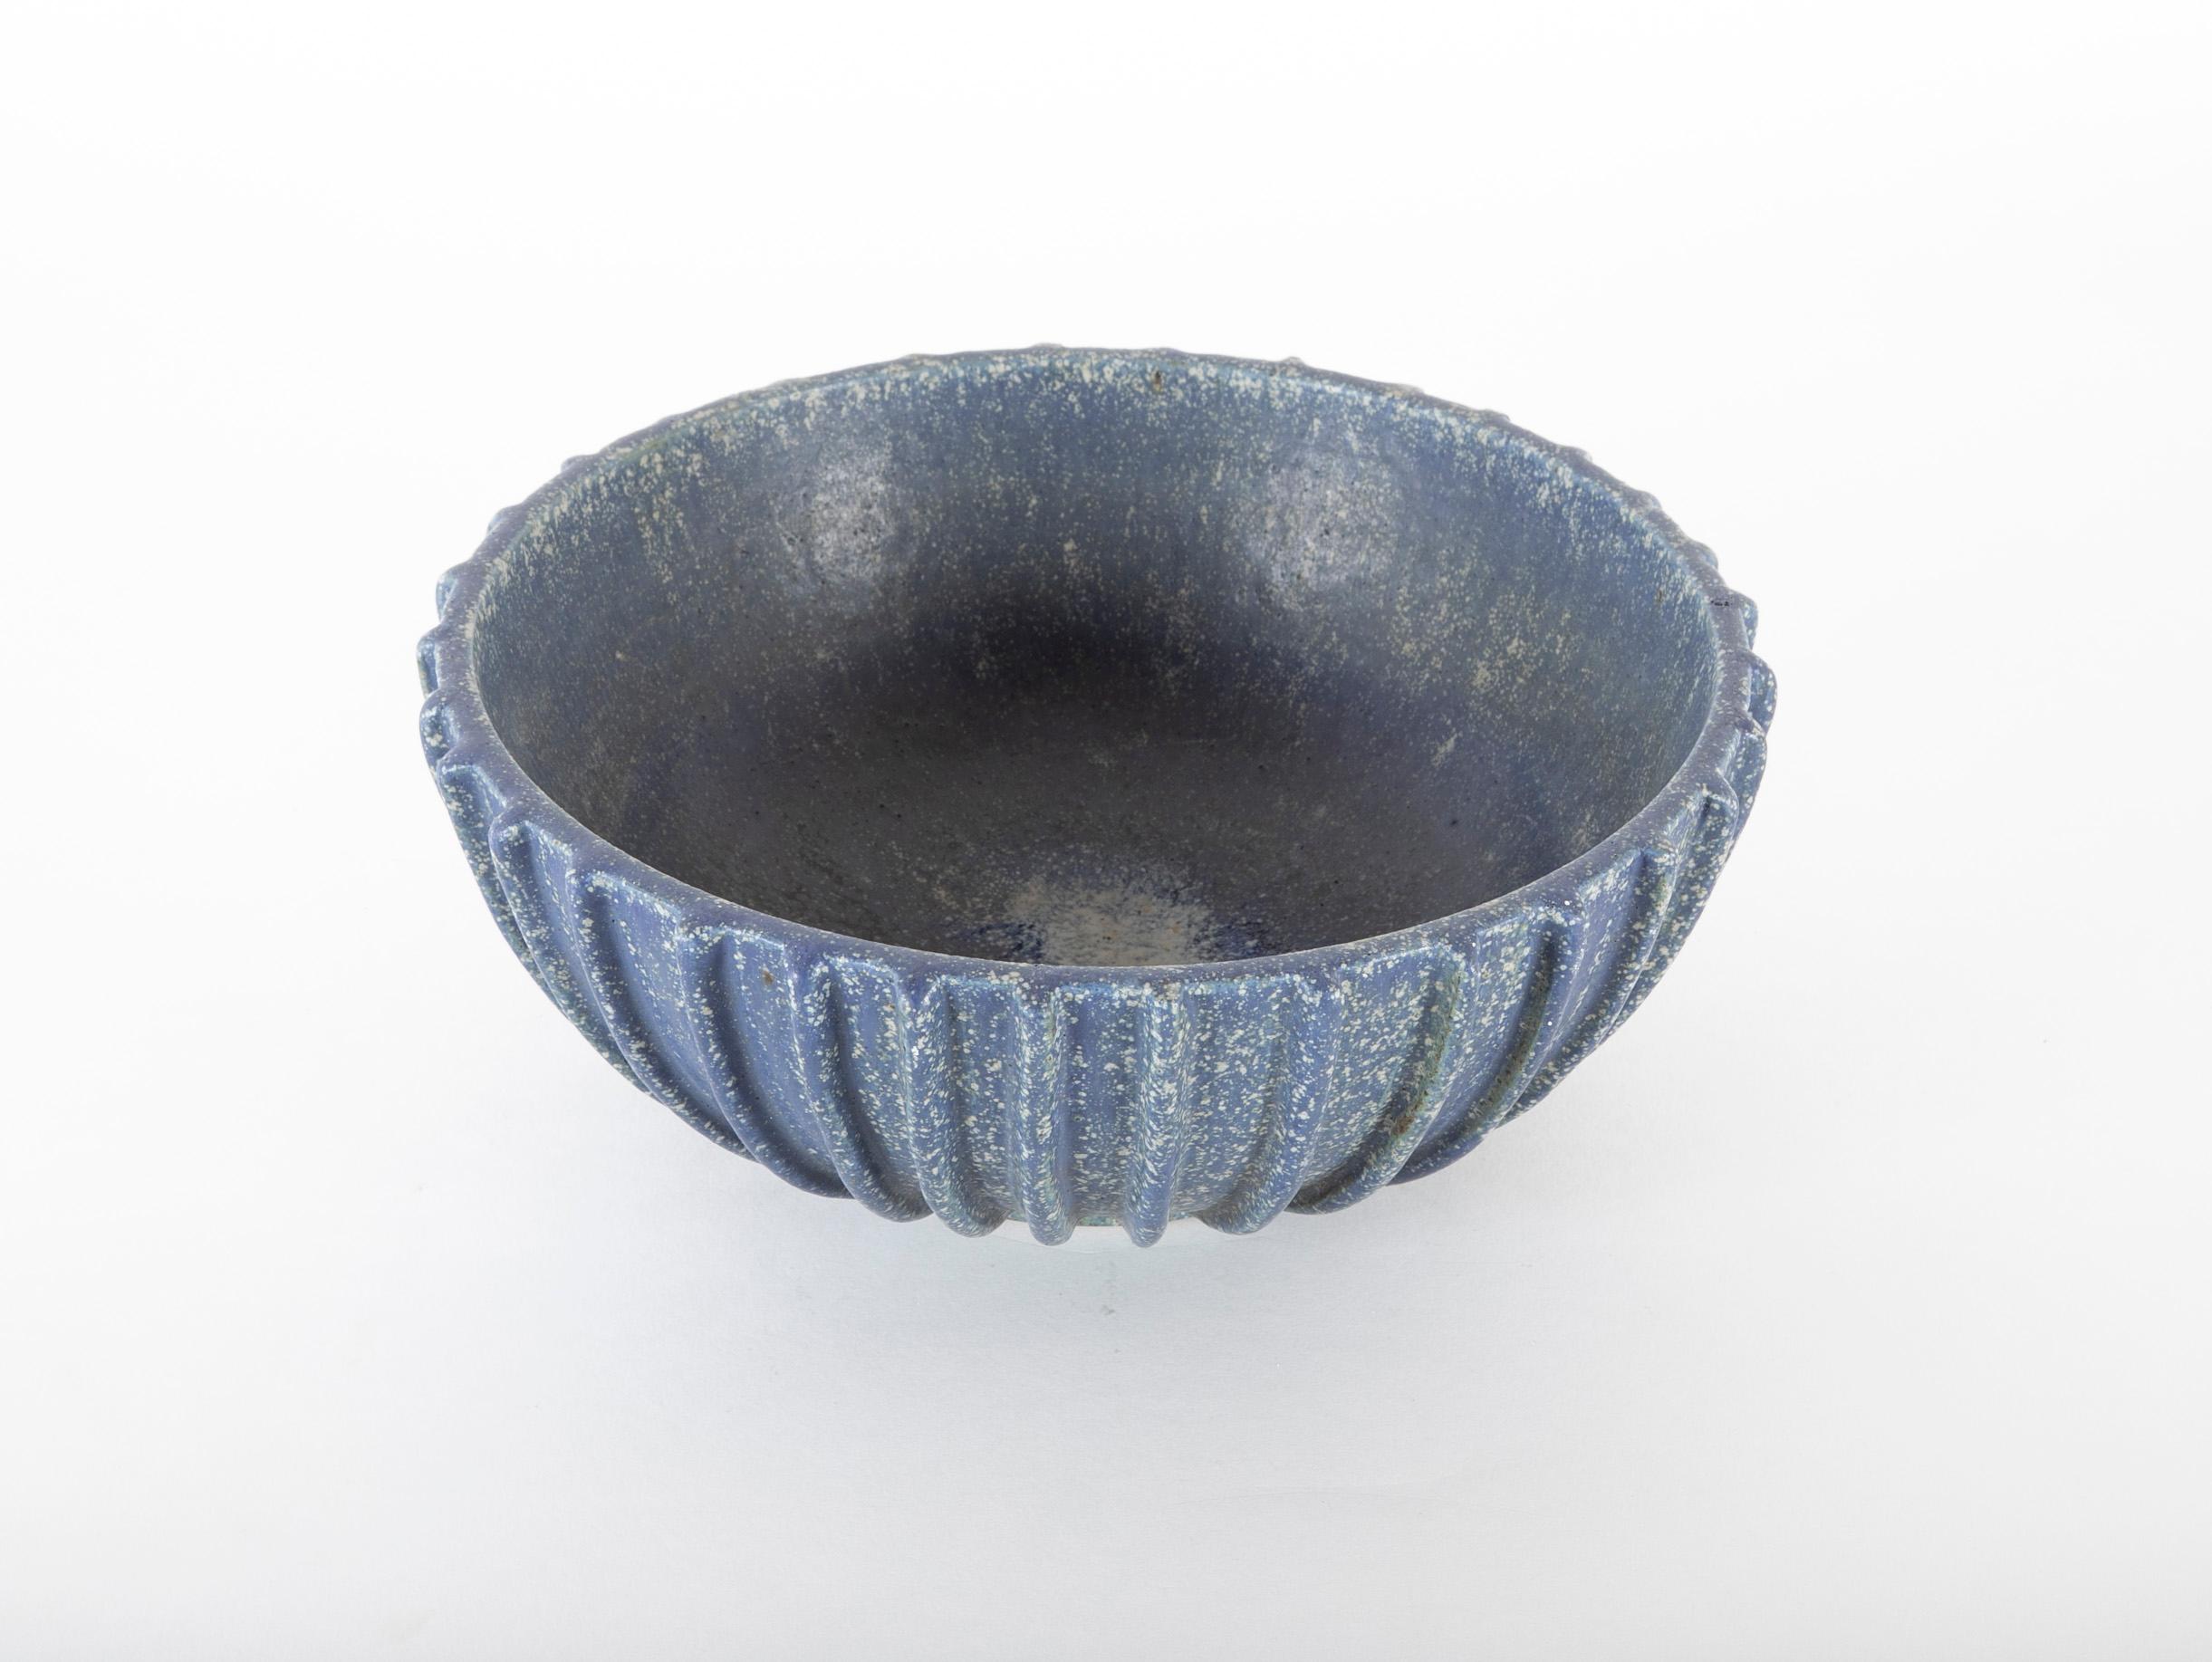 A stoneware bowl made by Arne Bang circa 1960s decorated with blue glaze. Signed AB 114.